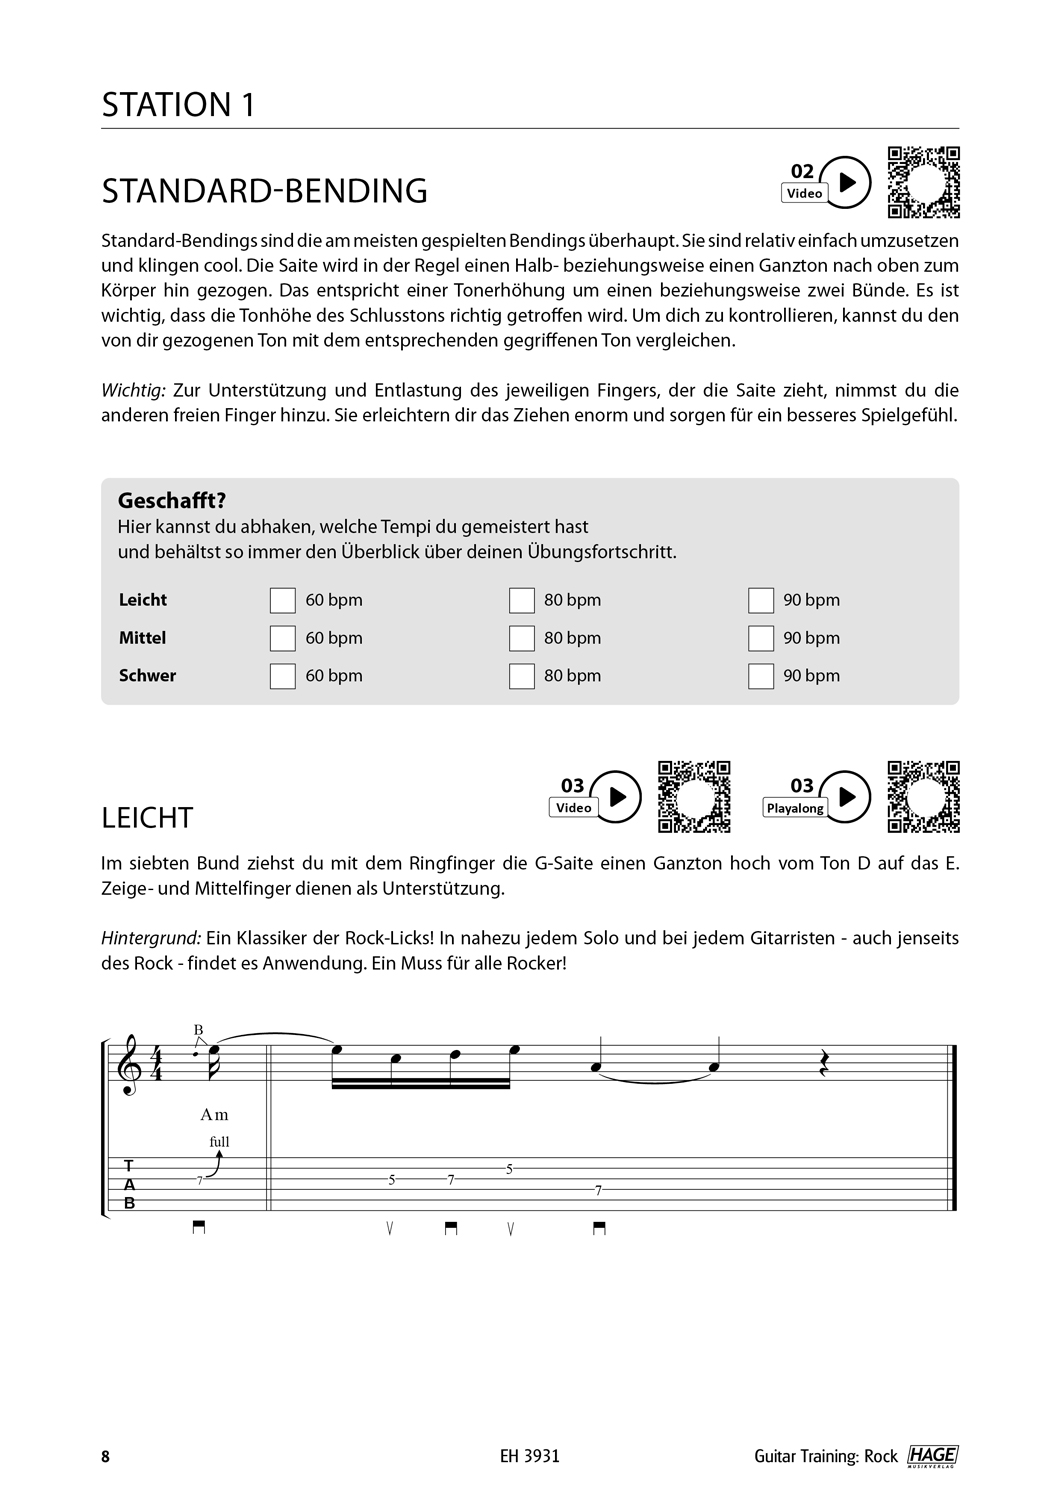 Guitar Training Rock Pages 7